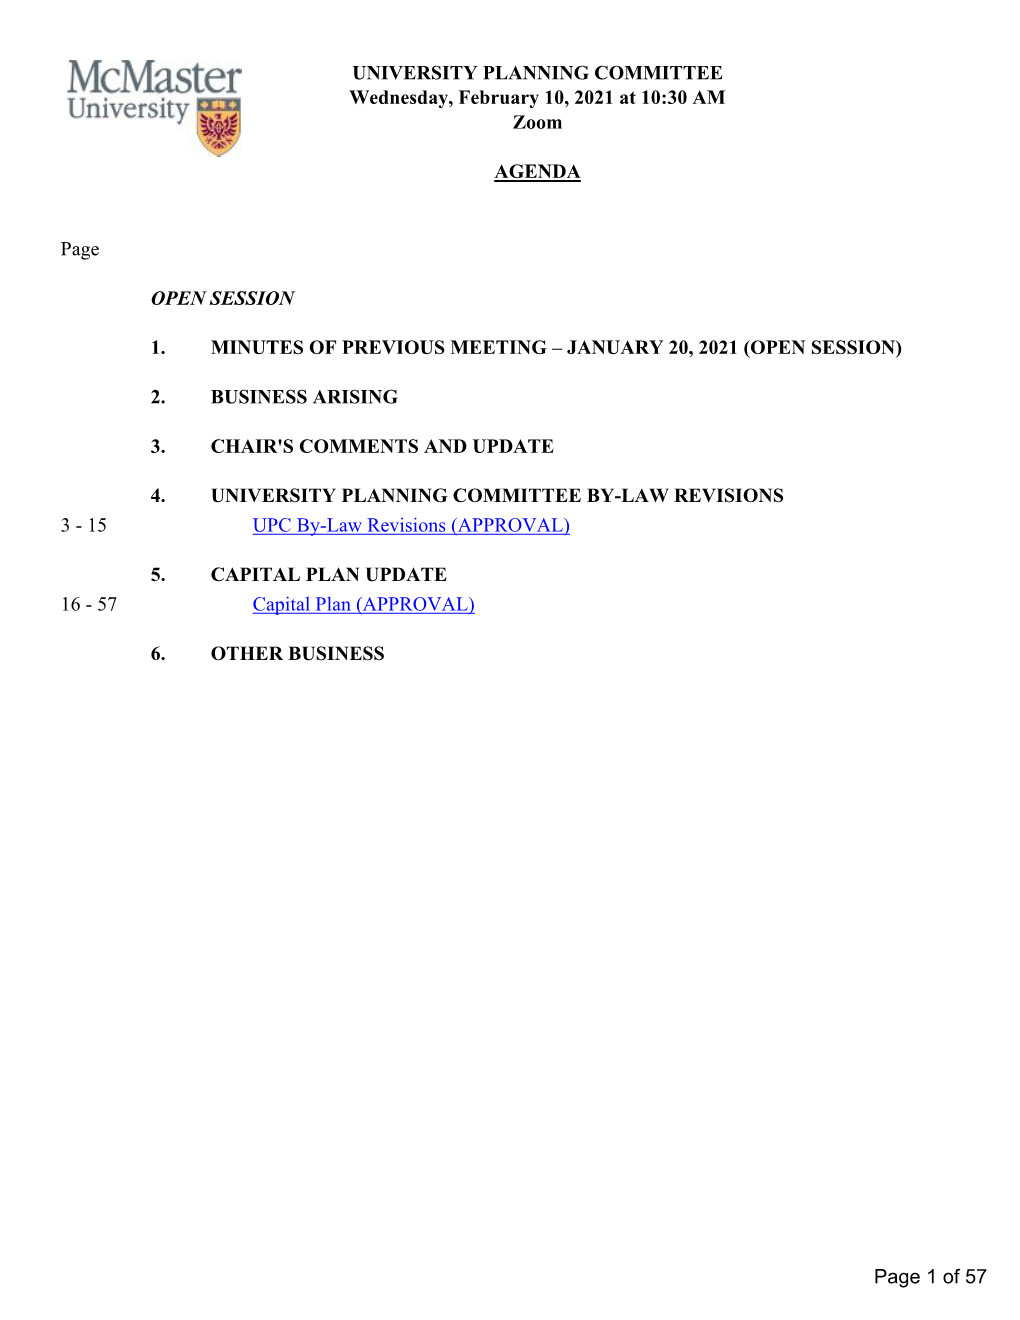 UNIVERSITY PLANNING COMMITTEE Wednesday, February 10, 2021 at 10:30 AM Zoom